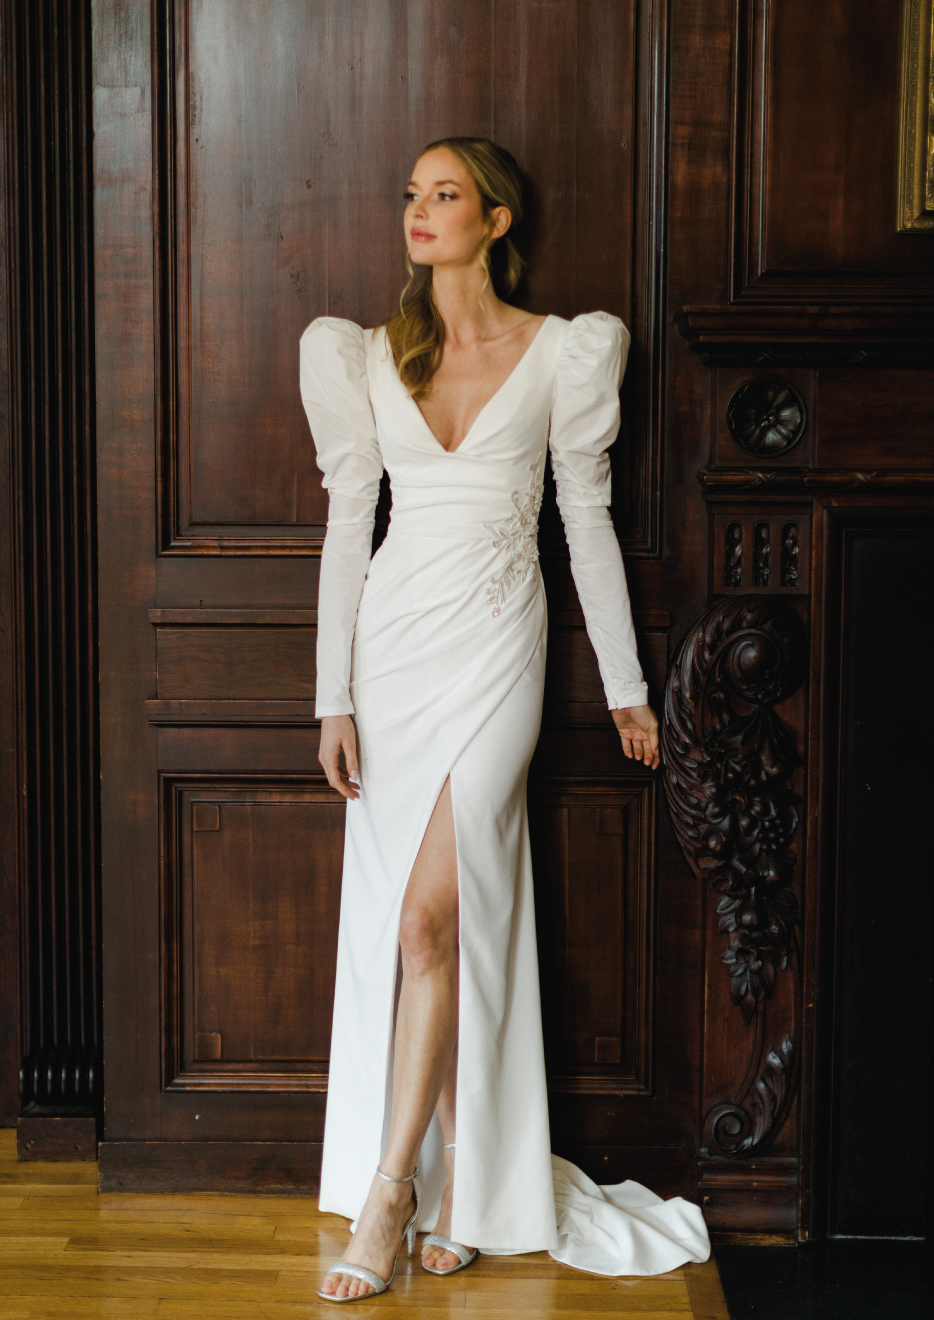 Bridal Dress Model Diana - Dress with Puffy Long Sleeve, plunging V–neck, soft front wrap with chapel train - Verdin New York